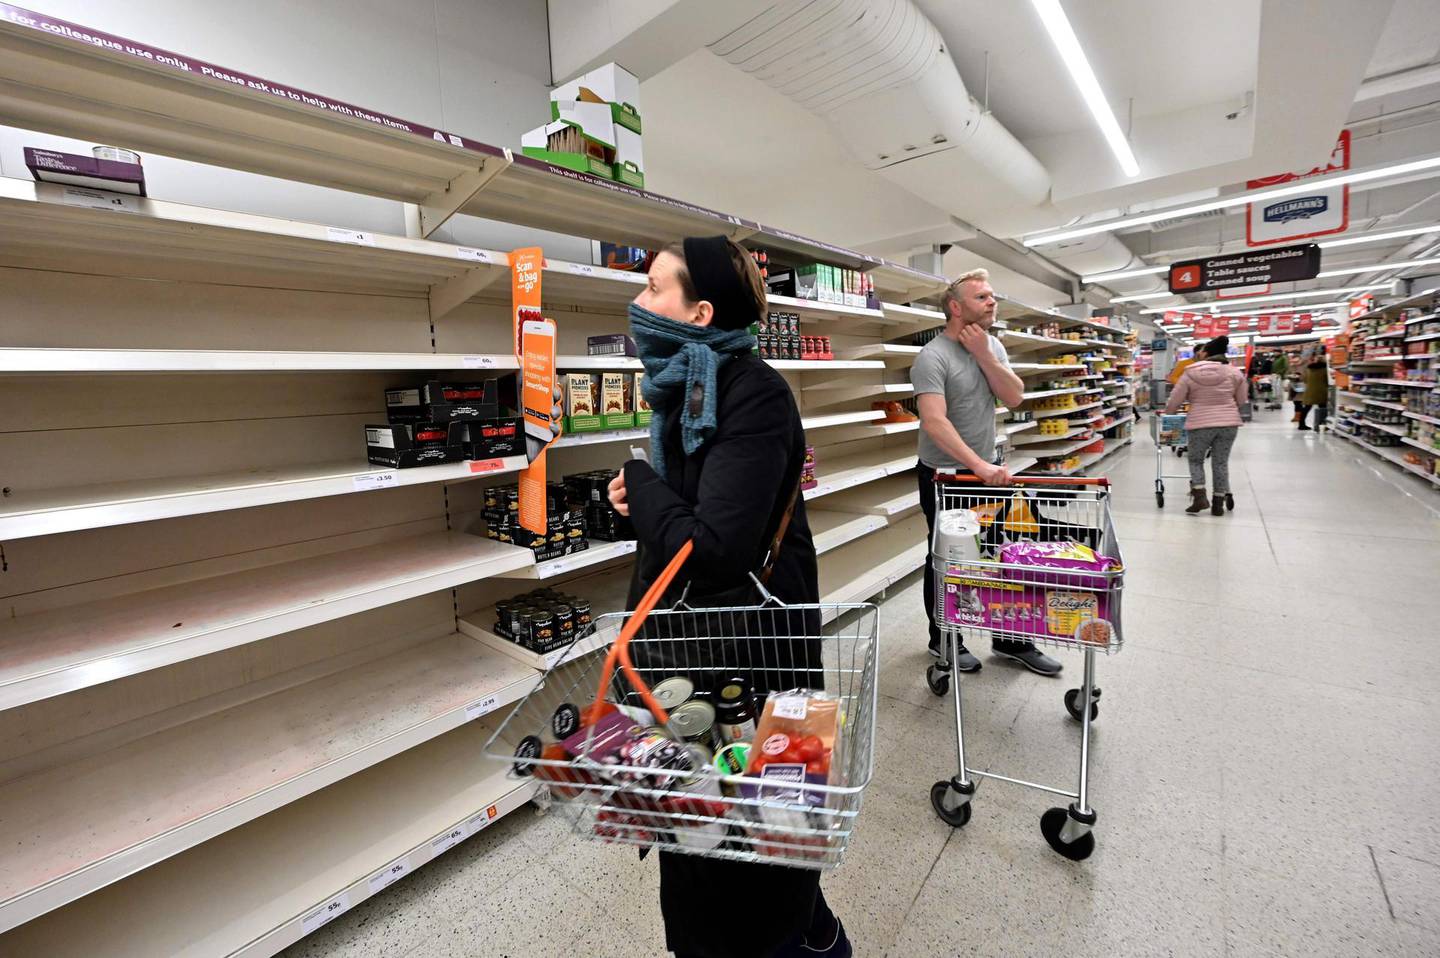 Shoppers are faced with partially empty shelves at a supermarket in London on March 14, 2020, as consumers worry about product shortages, leading to the stockpiling of household products due to the outbreak of the novel coronavirus COVID-19.   British Prime Minister Boris Johnson, who has faced criticism for his country's light touch approach to tackling the coronavirus outbreak, is preparing to review its approach and ban mass gatherings, according to government sources Saturday. / AFP / JUSTIN TALLIS
